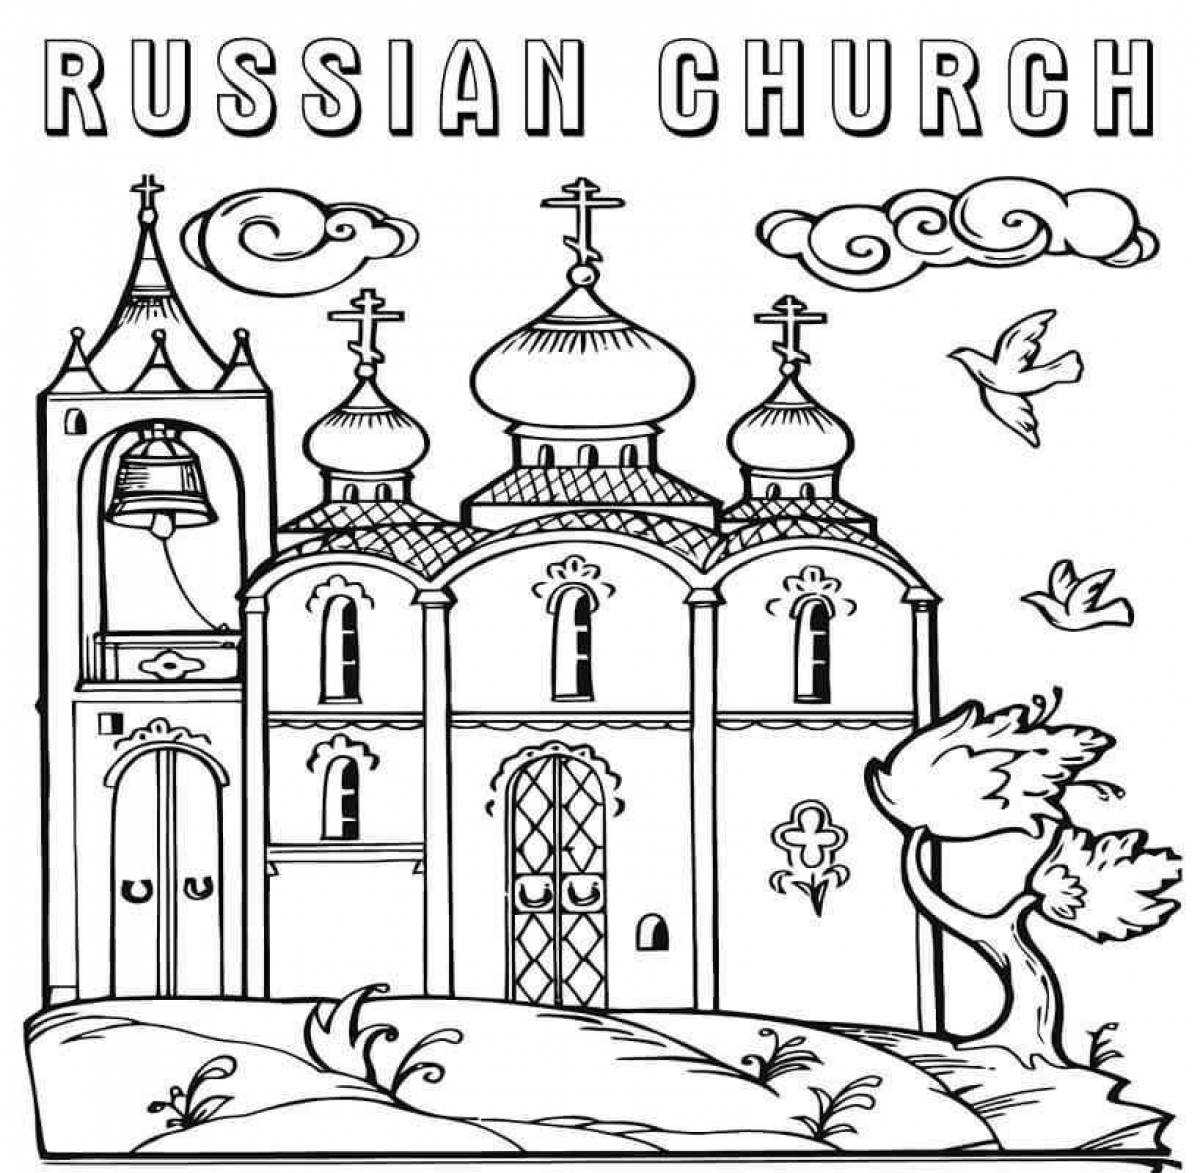 Playful church coloring page for kids